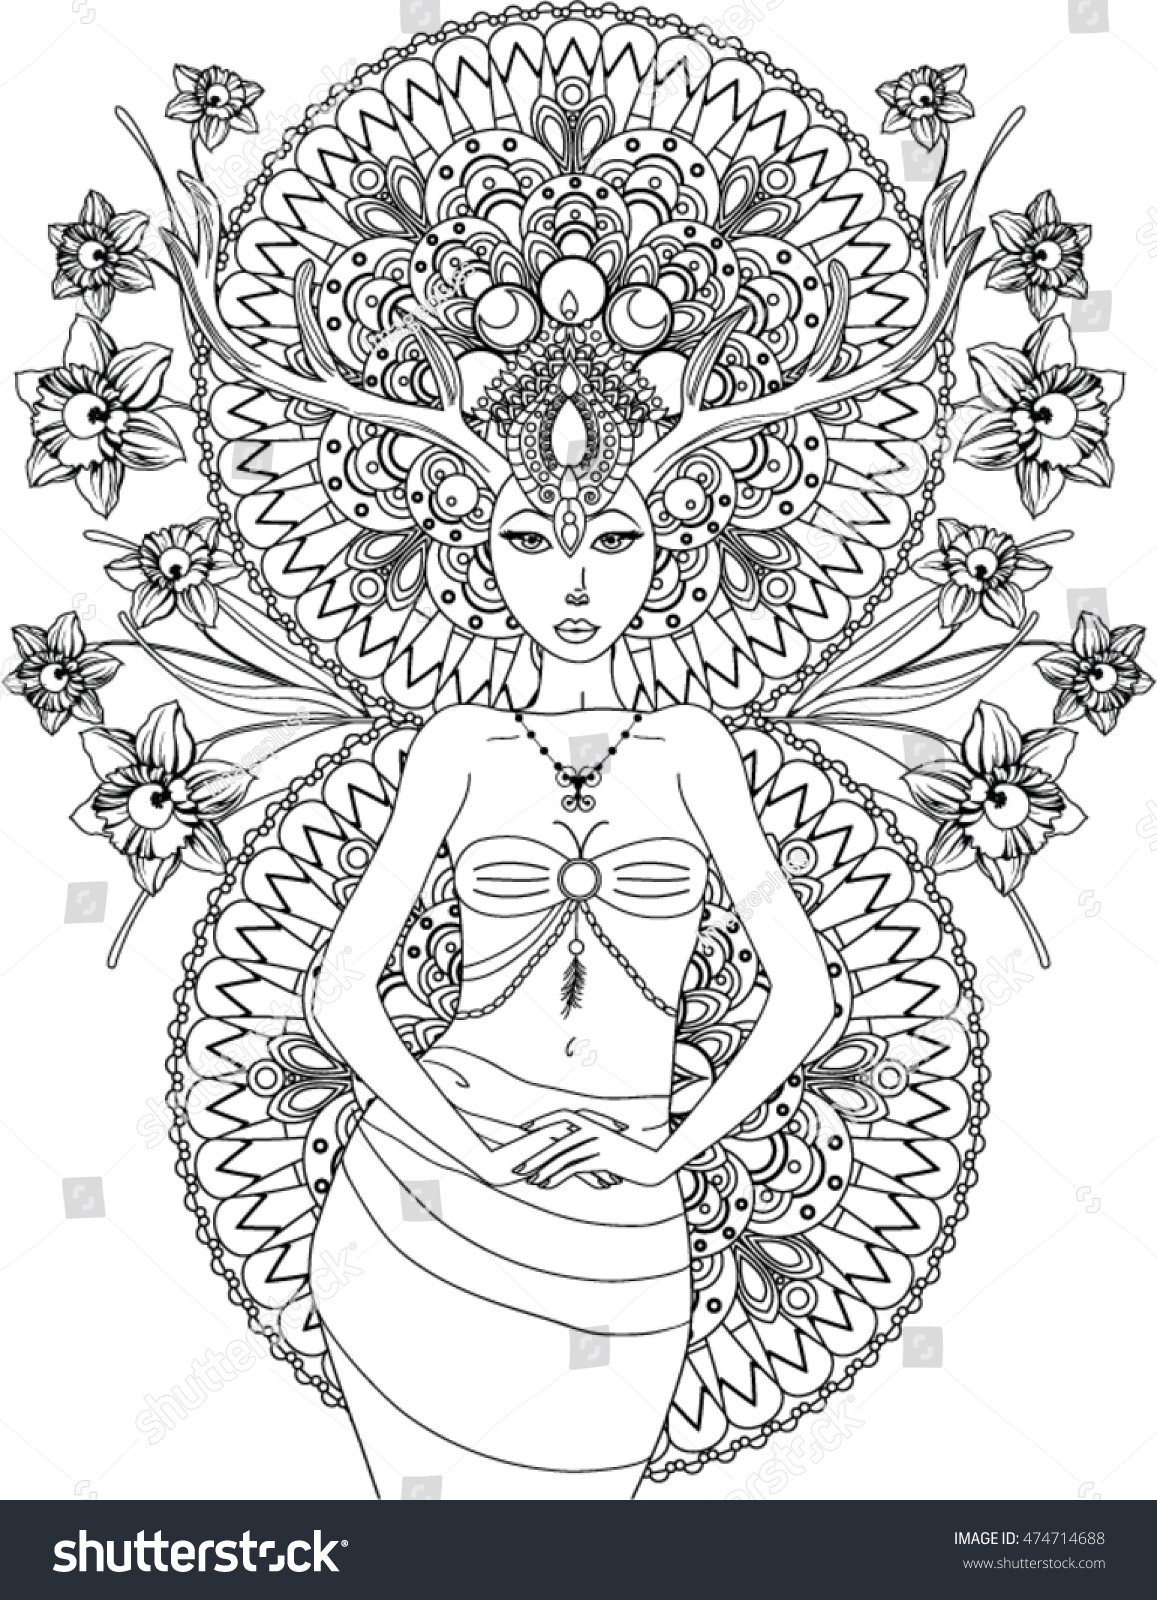 Indian Goddess coloring page for adult